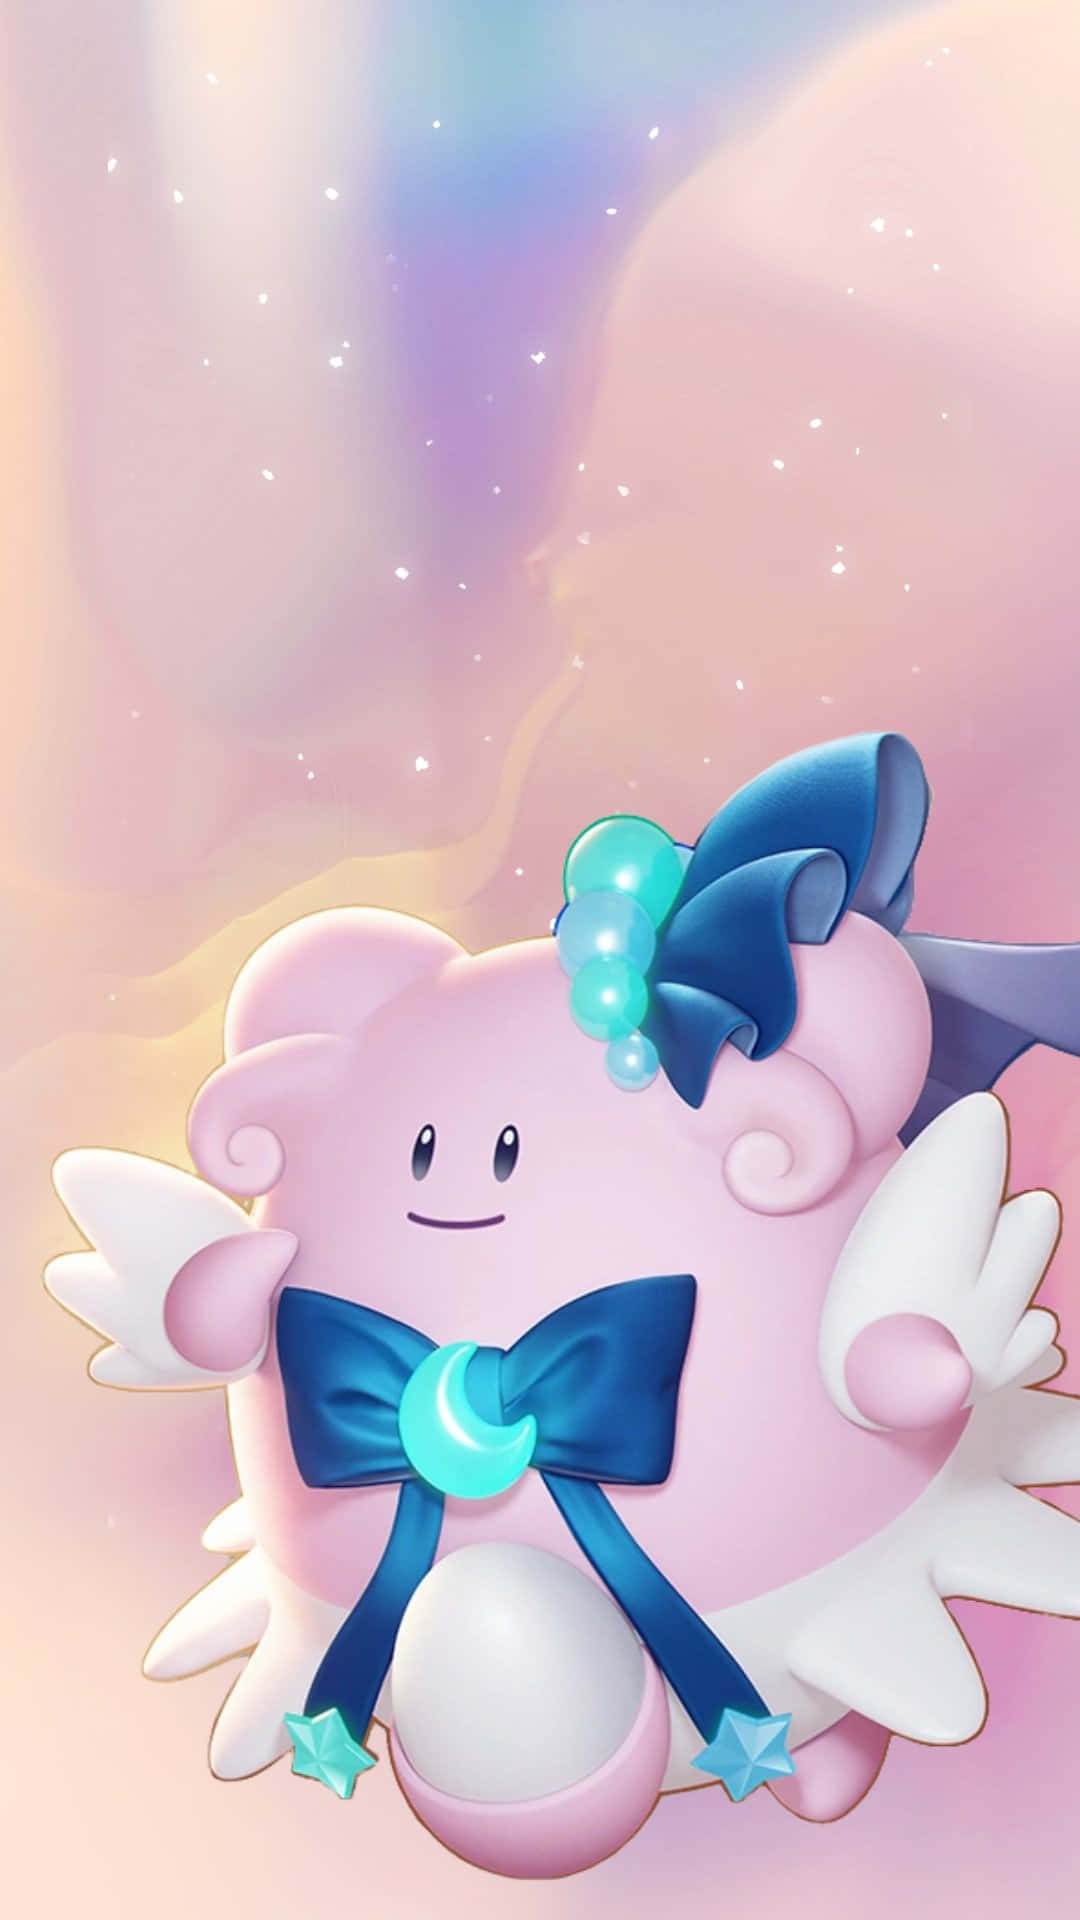 Blisseymed Söta Blå Band. (this Would Be An Appropriate Translation For A Description Of A Computer Or Mobile Wallpaper Featuring Blissey With Blue Ribbons In A Cute Design.) Wallpaper